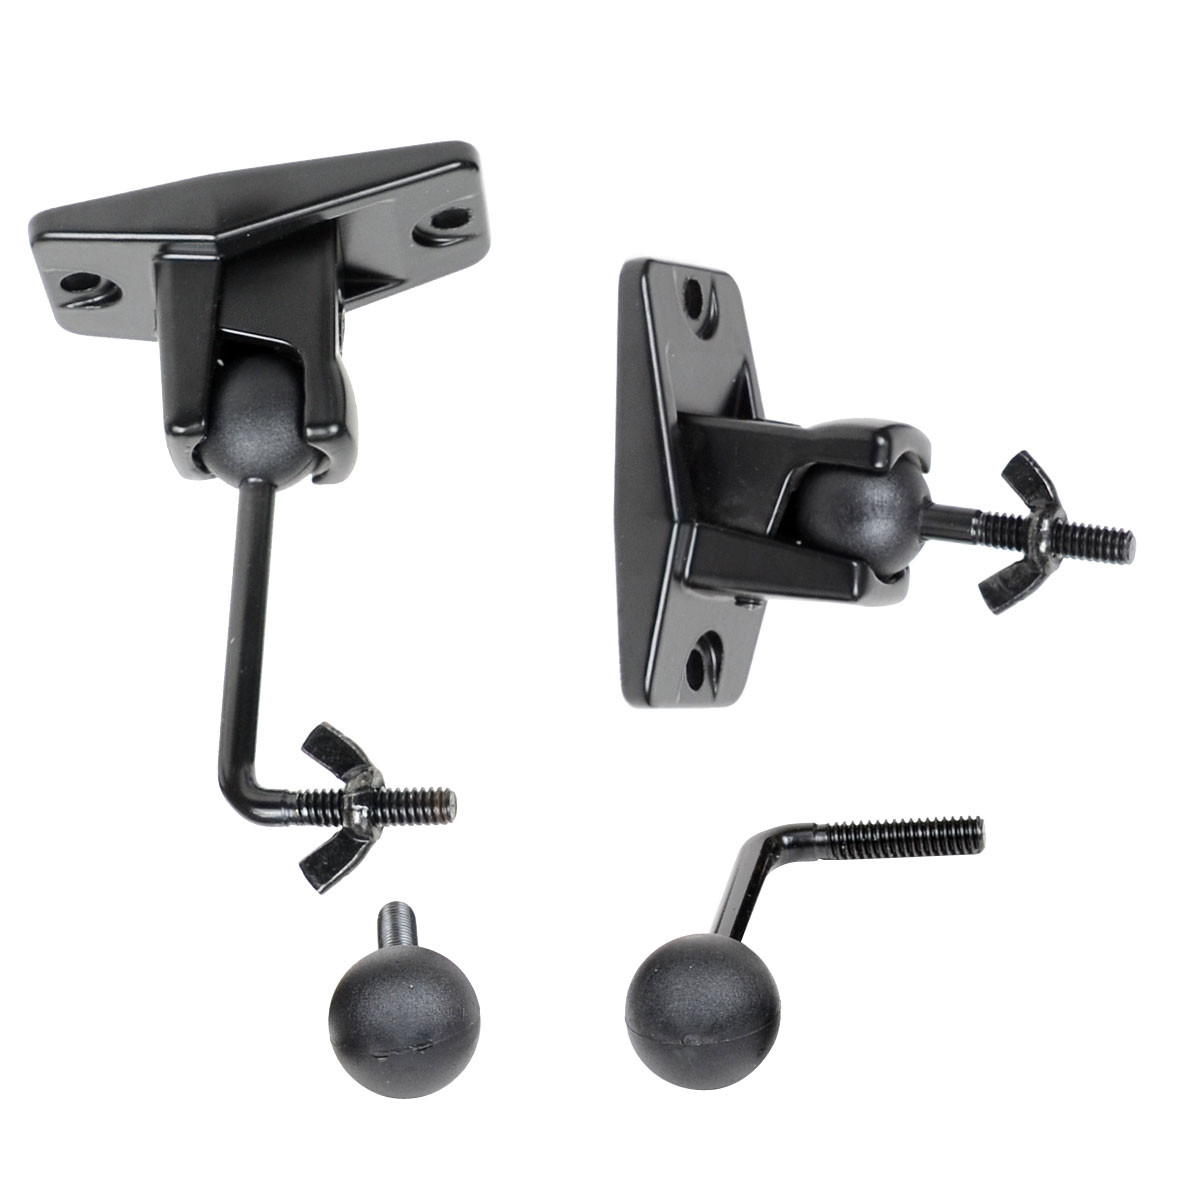 VideoSecu 2 Packs of Ceiling and Wall Speaker Mount Satellite Surround Sound Home Theater Brackets in Black 1ST - image 1 of 4